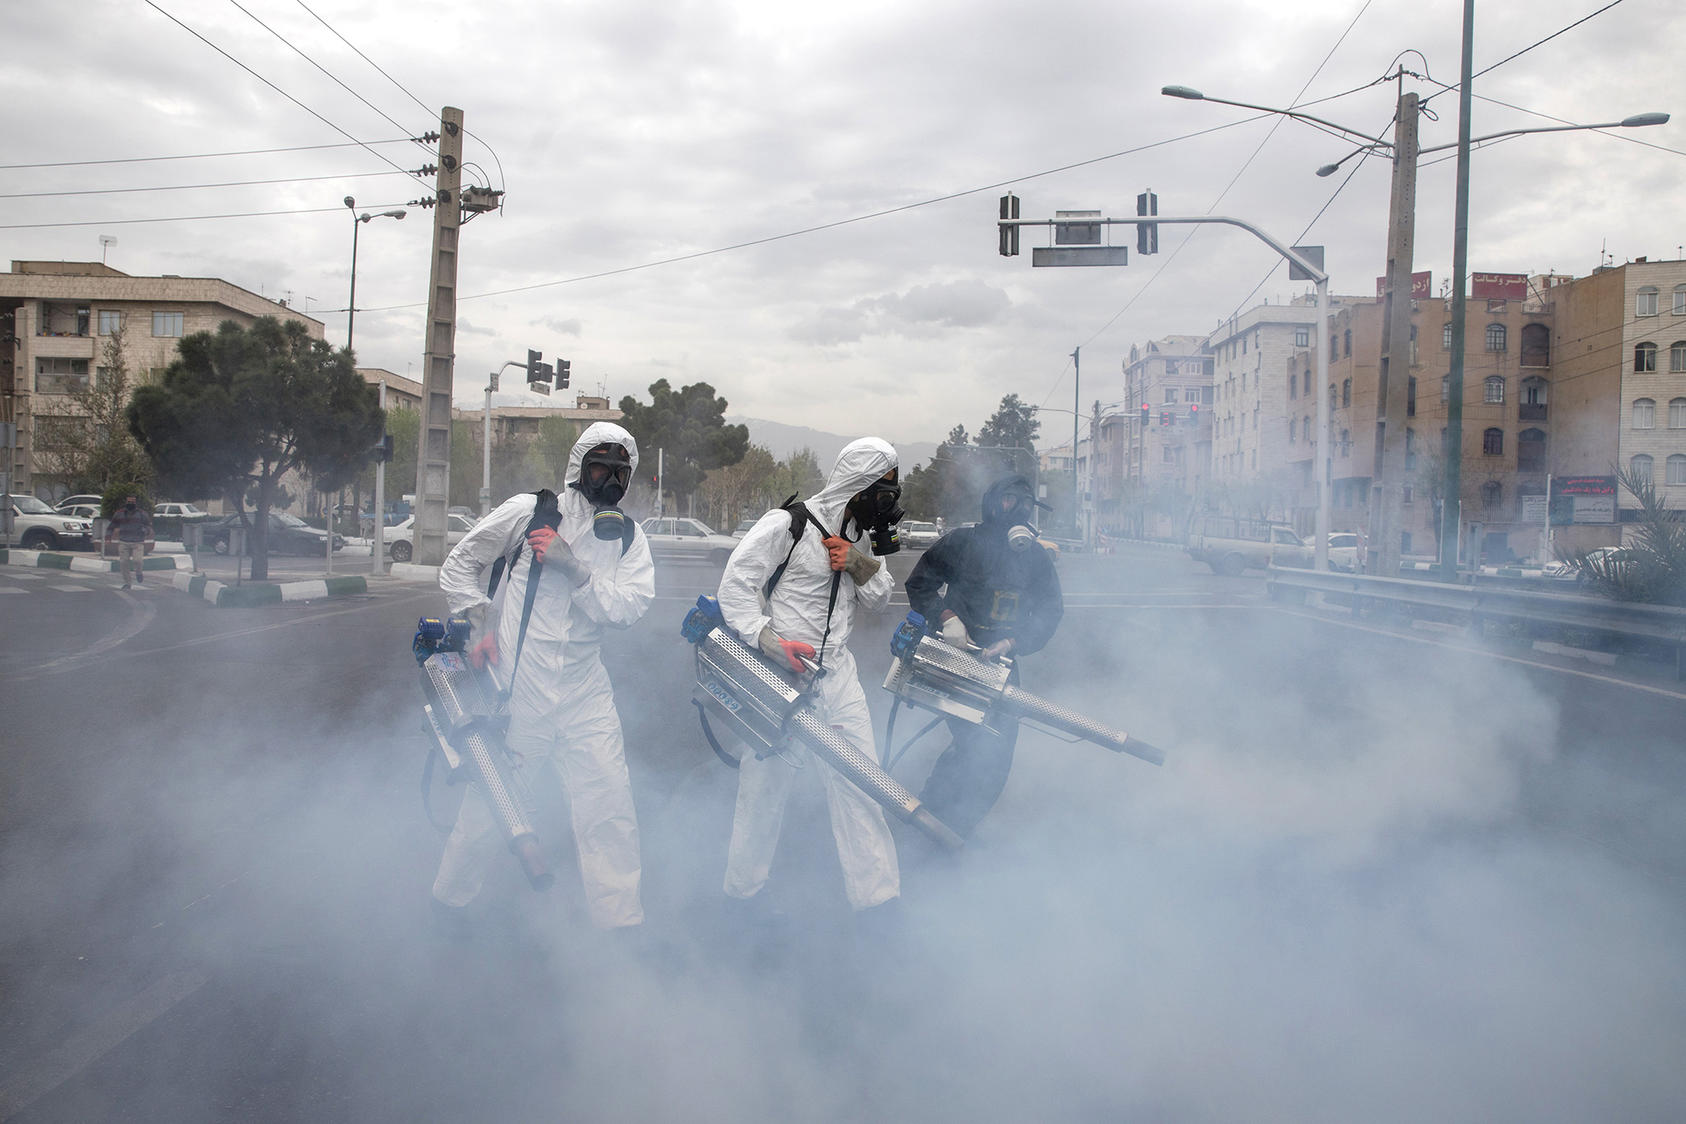 Iranian firefighters disinfect the streets of Tehran, Iran on Wednesday, March 18, 2020. (Arash Khamooshi/The New York Times)